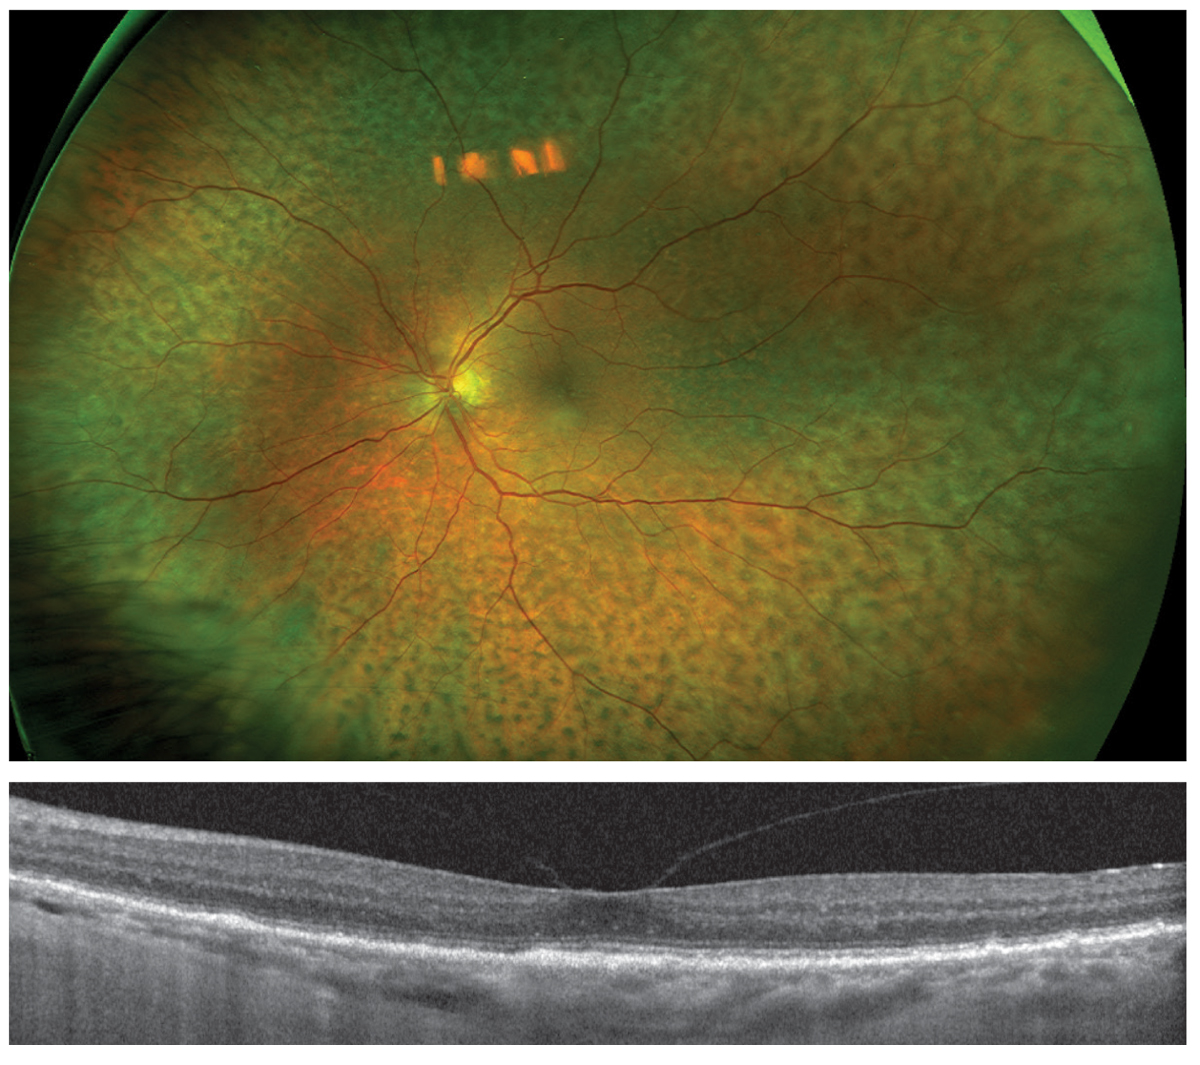 Fig. 19. One year post-op, fundus photography (top) shows persistent pigmentary change but complete resolution of choroidal and retinal detachments. OCT (bottom) shows resolution of subretinal fluid, normalized choroidal thickness and absence of choroidal folds.